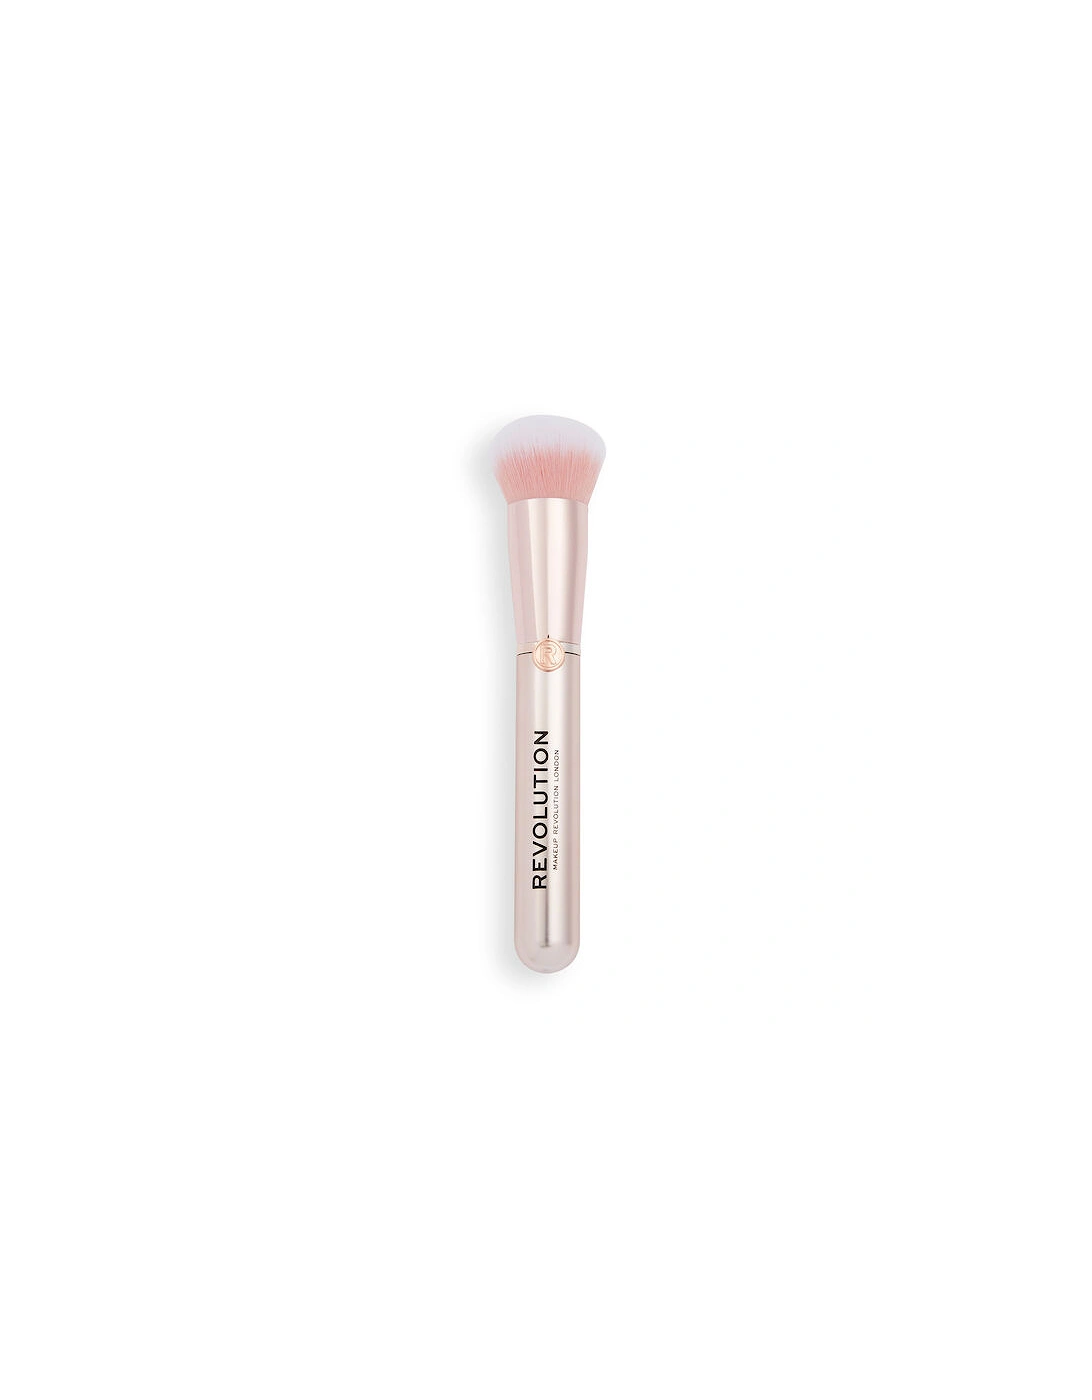 Makeup Create Buffing Foundation Brush R7, 2 of 1